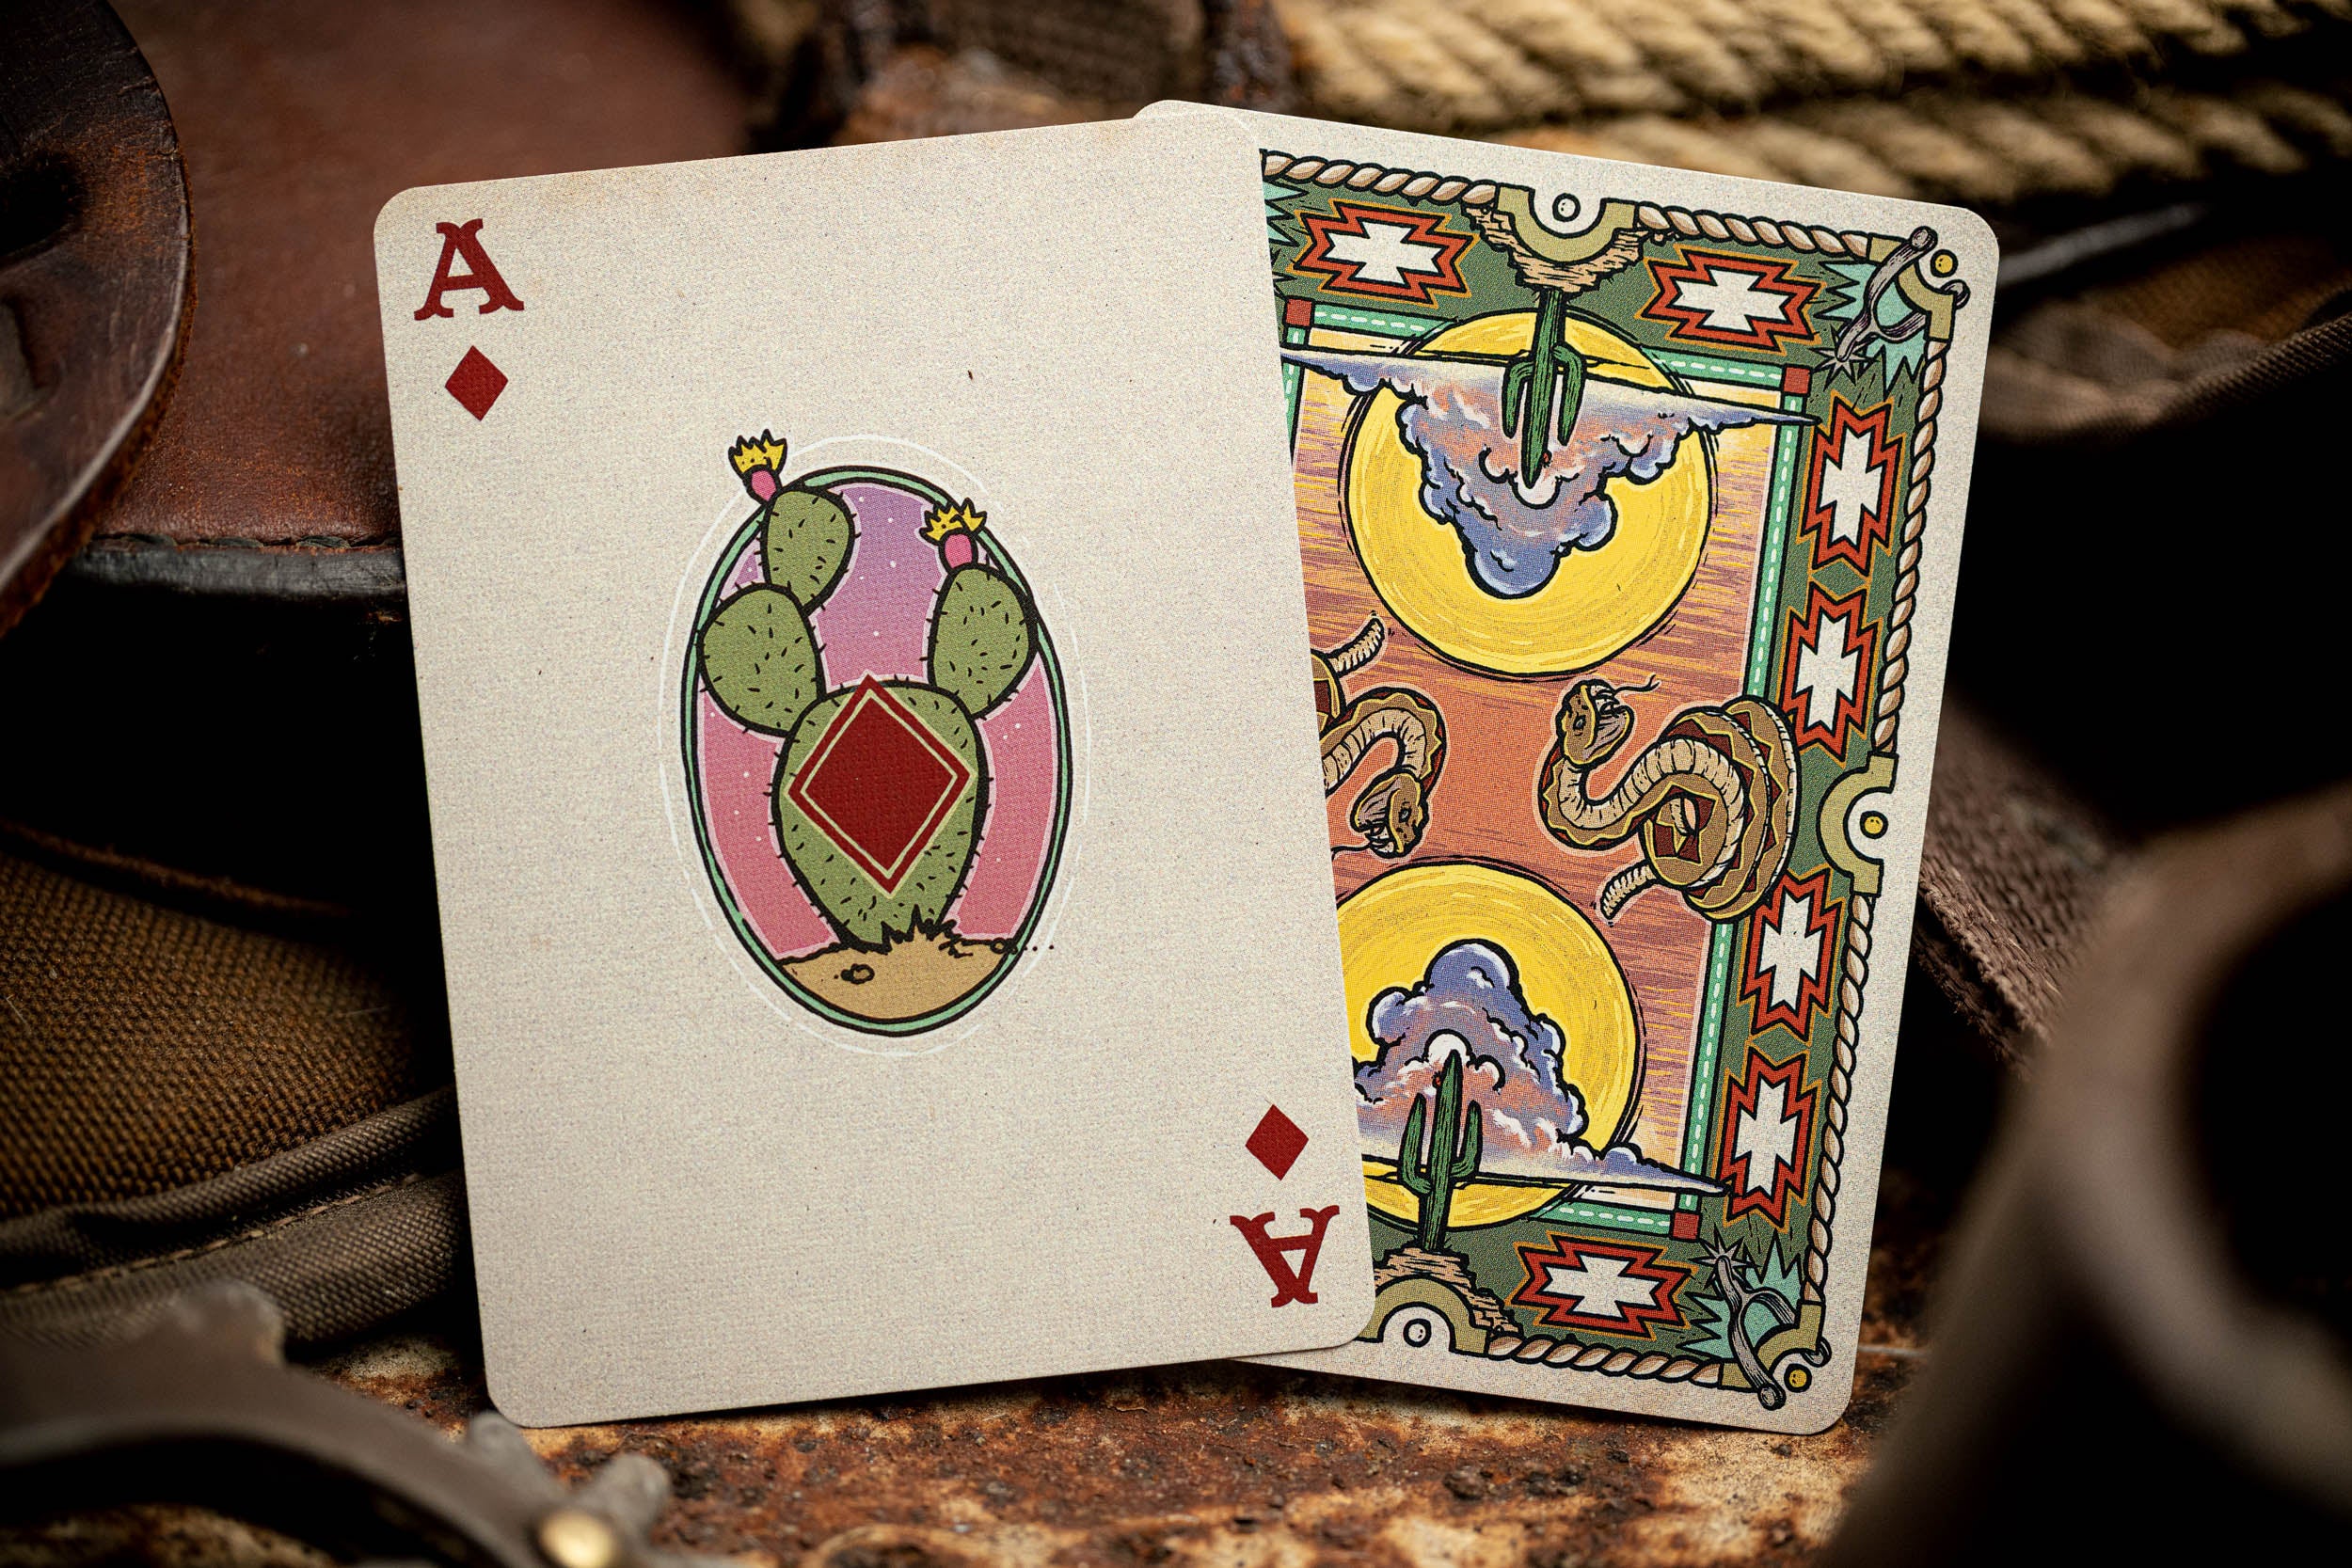 Rawhide Luxury Playing Cards